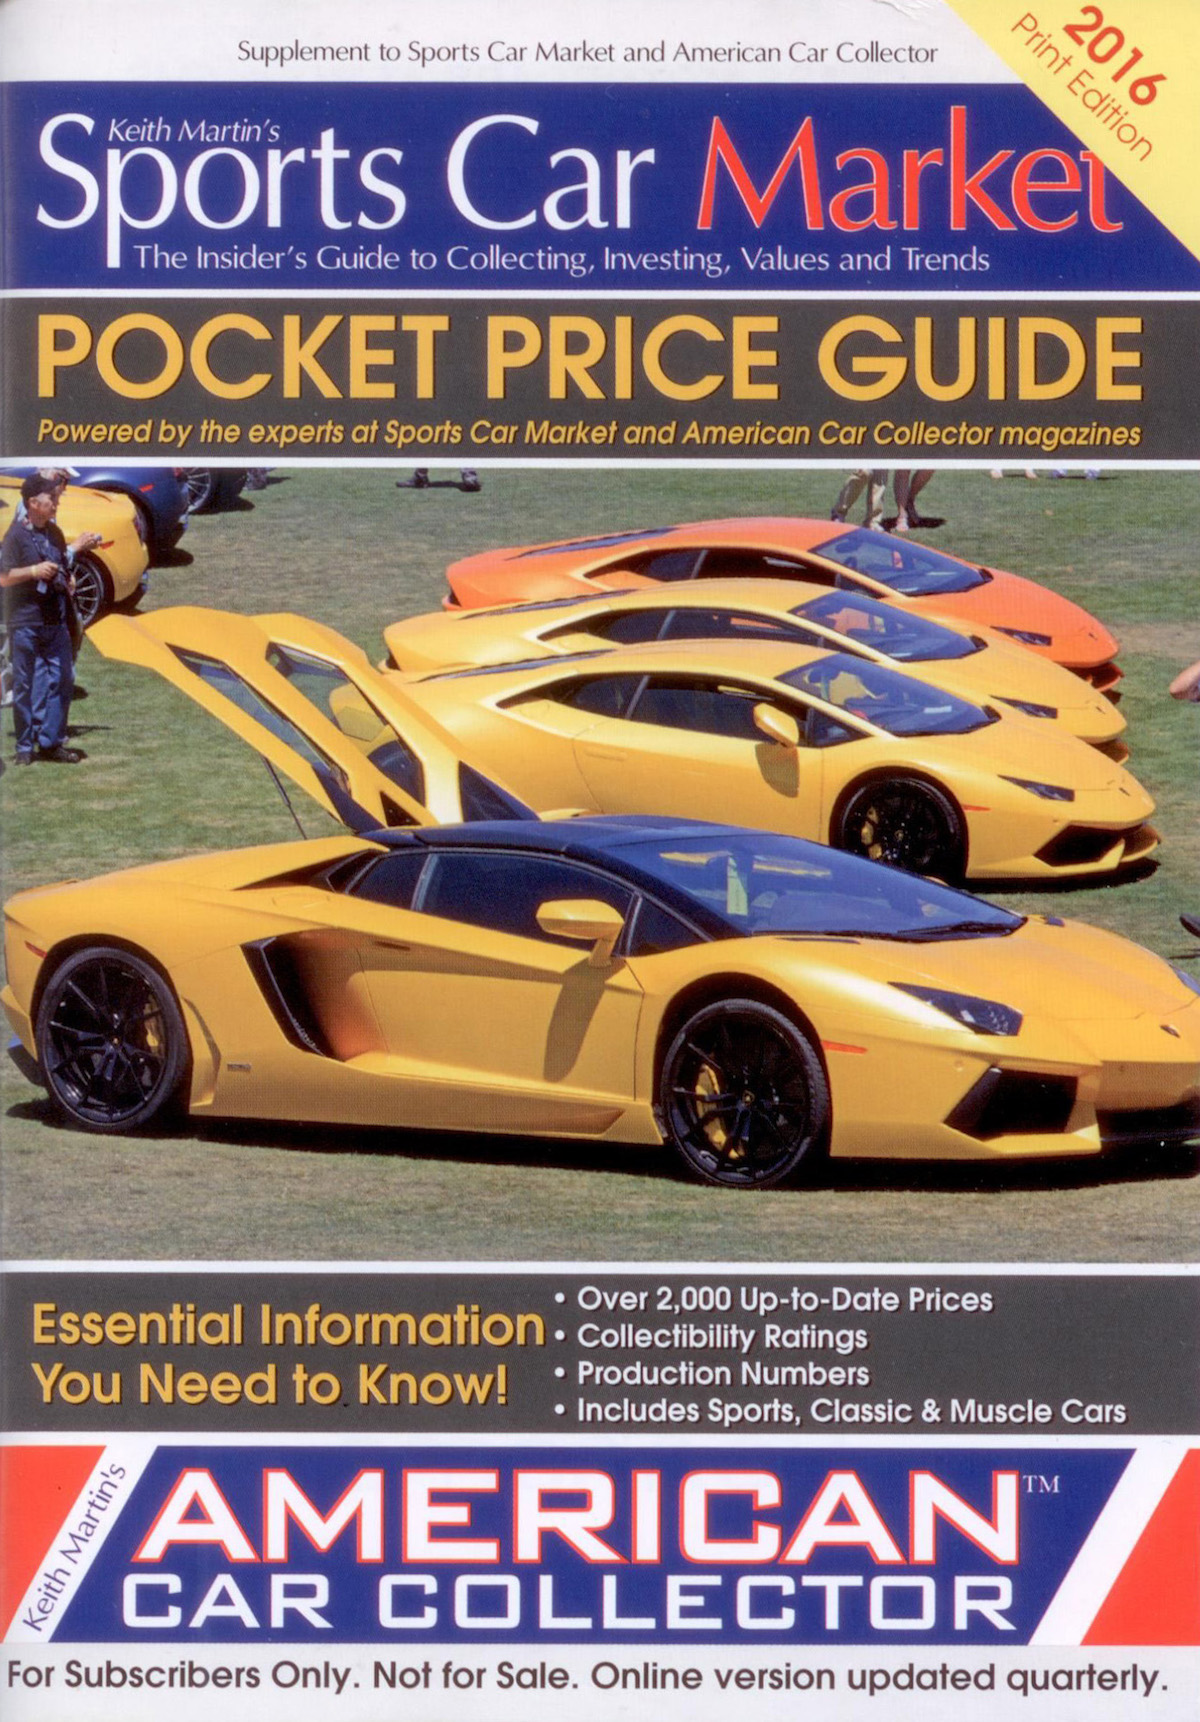 The New Sports Car Market Pocket Price Guide Is Here!